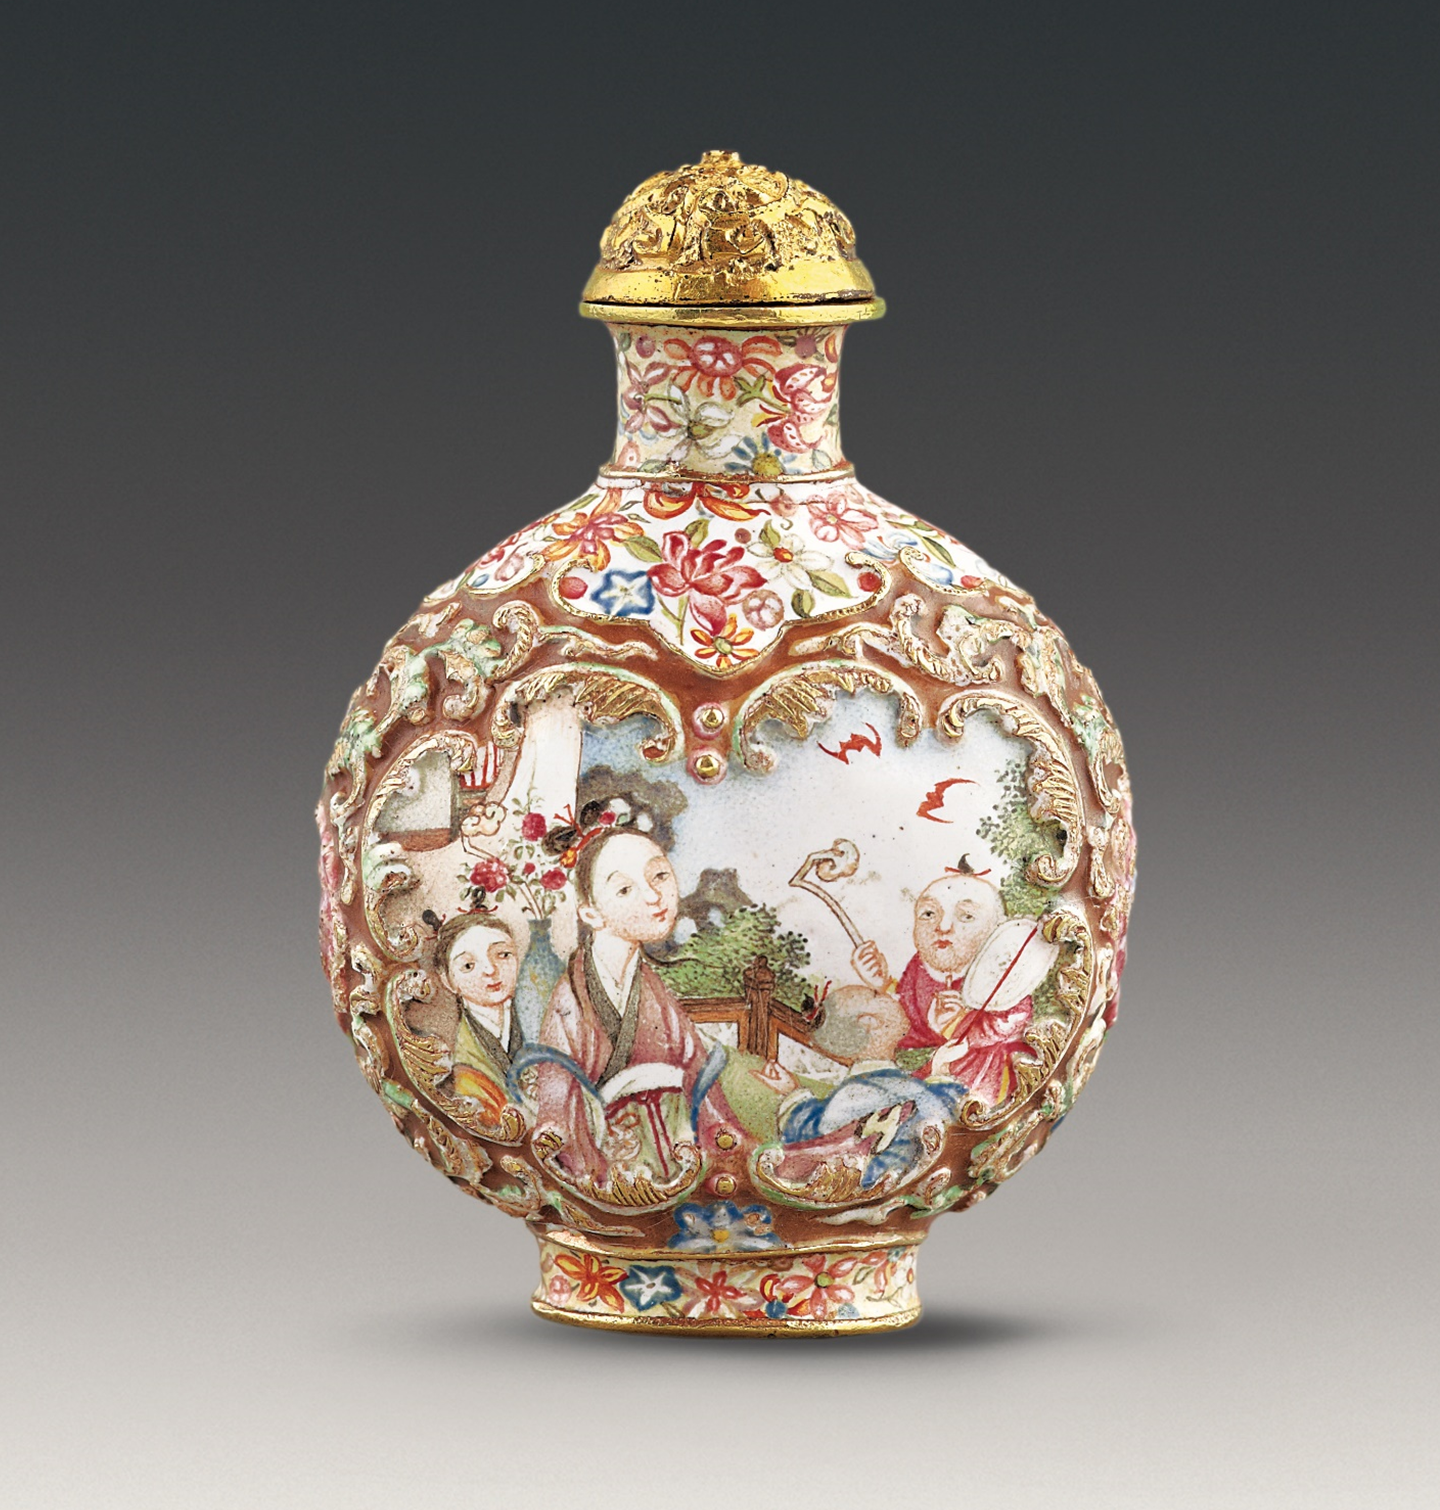 The Hong Kong Museum of Art today (September 28) announced that Christopher and Josephine Sin generously donated nearly 500 pieces of Chinese snuff bottles from the Fuyun Xuan Collection of Chinese Snuff Bottles for the museum's permanent collection. Picture shows the newly donated gold snuff bottle with scene of mother and children in painted enamels. With precious gold as its body, this bottle is rare among painted enamel metalware. 
